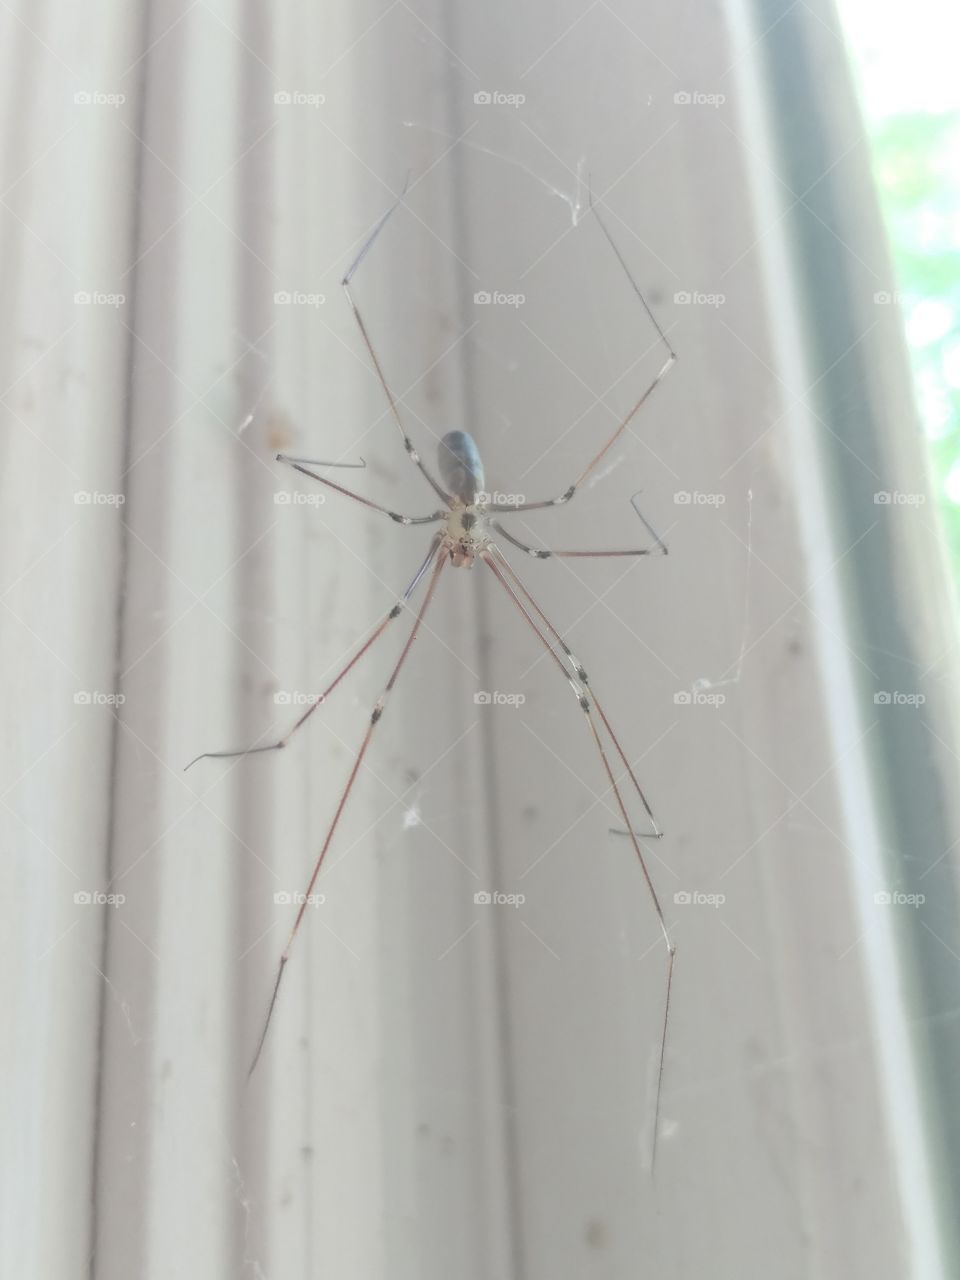 A female Pholcus phalangioides (Long-bodied cellar spider; Daddy Long-legs) sitting in her web awaiting her prey.